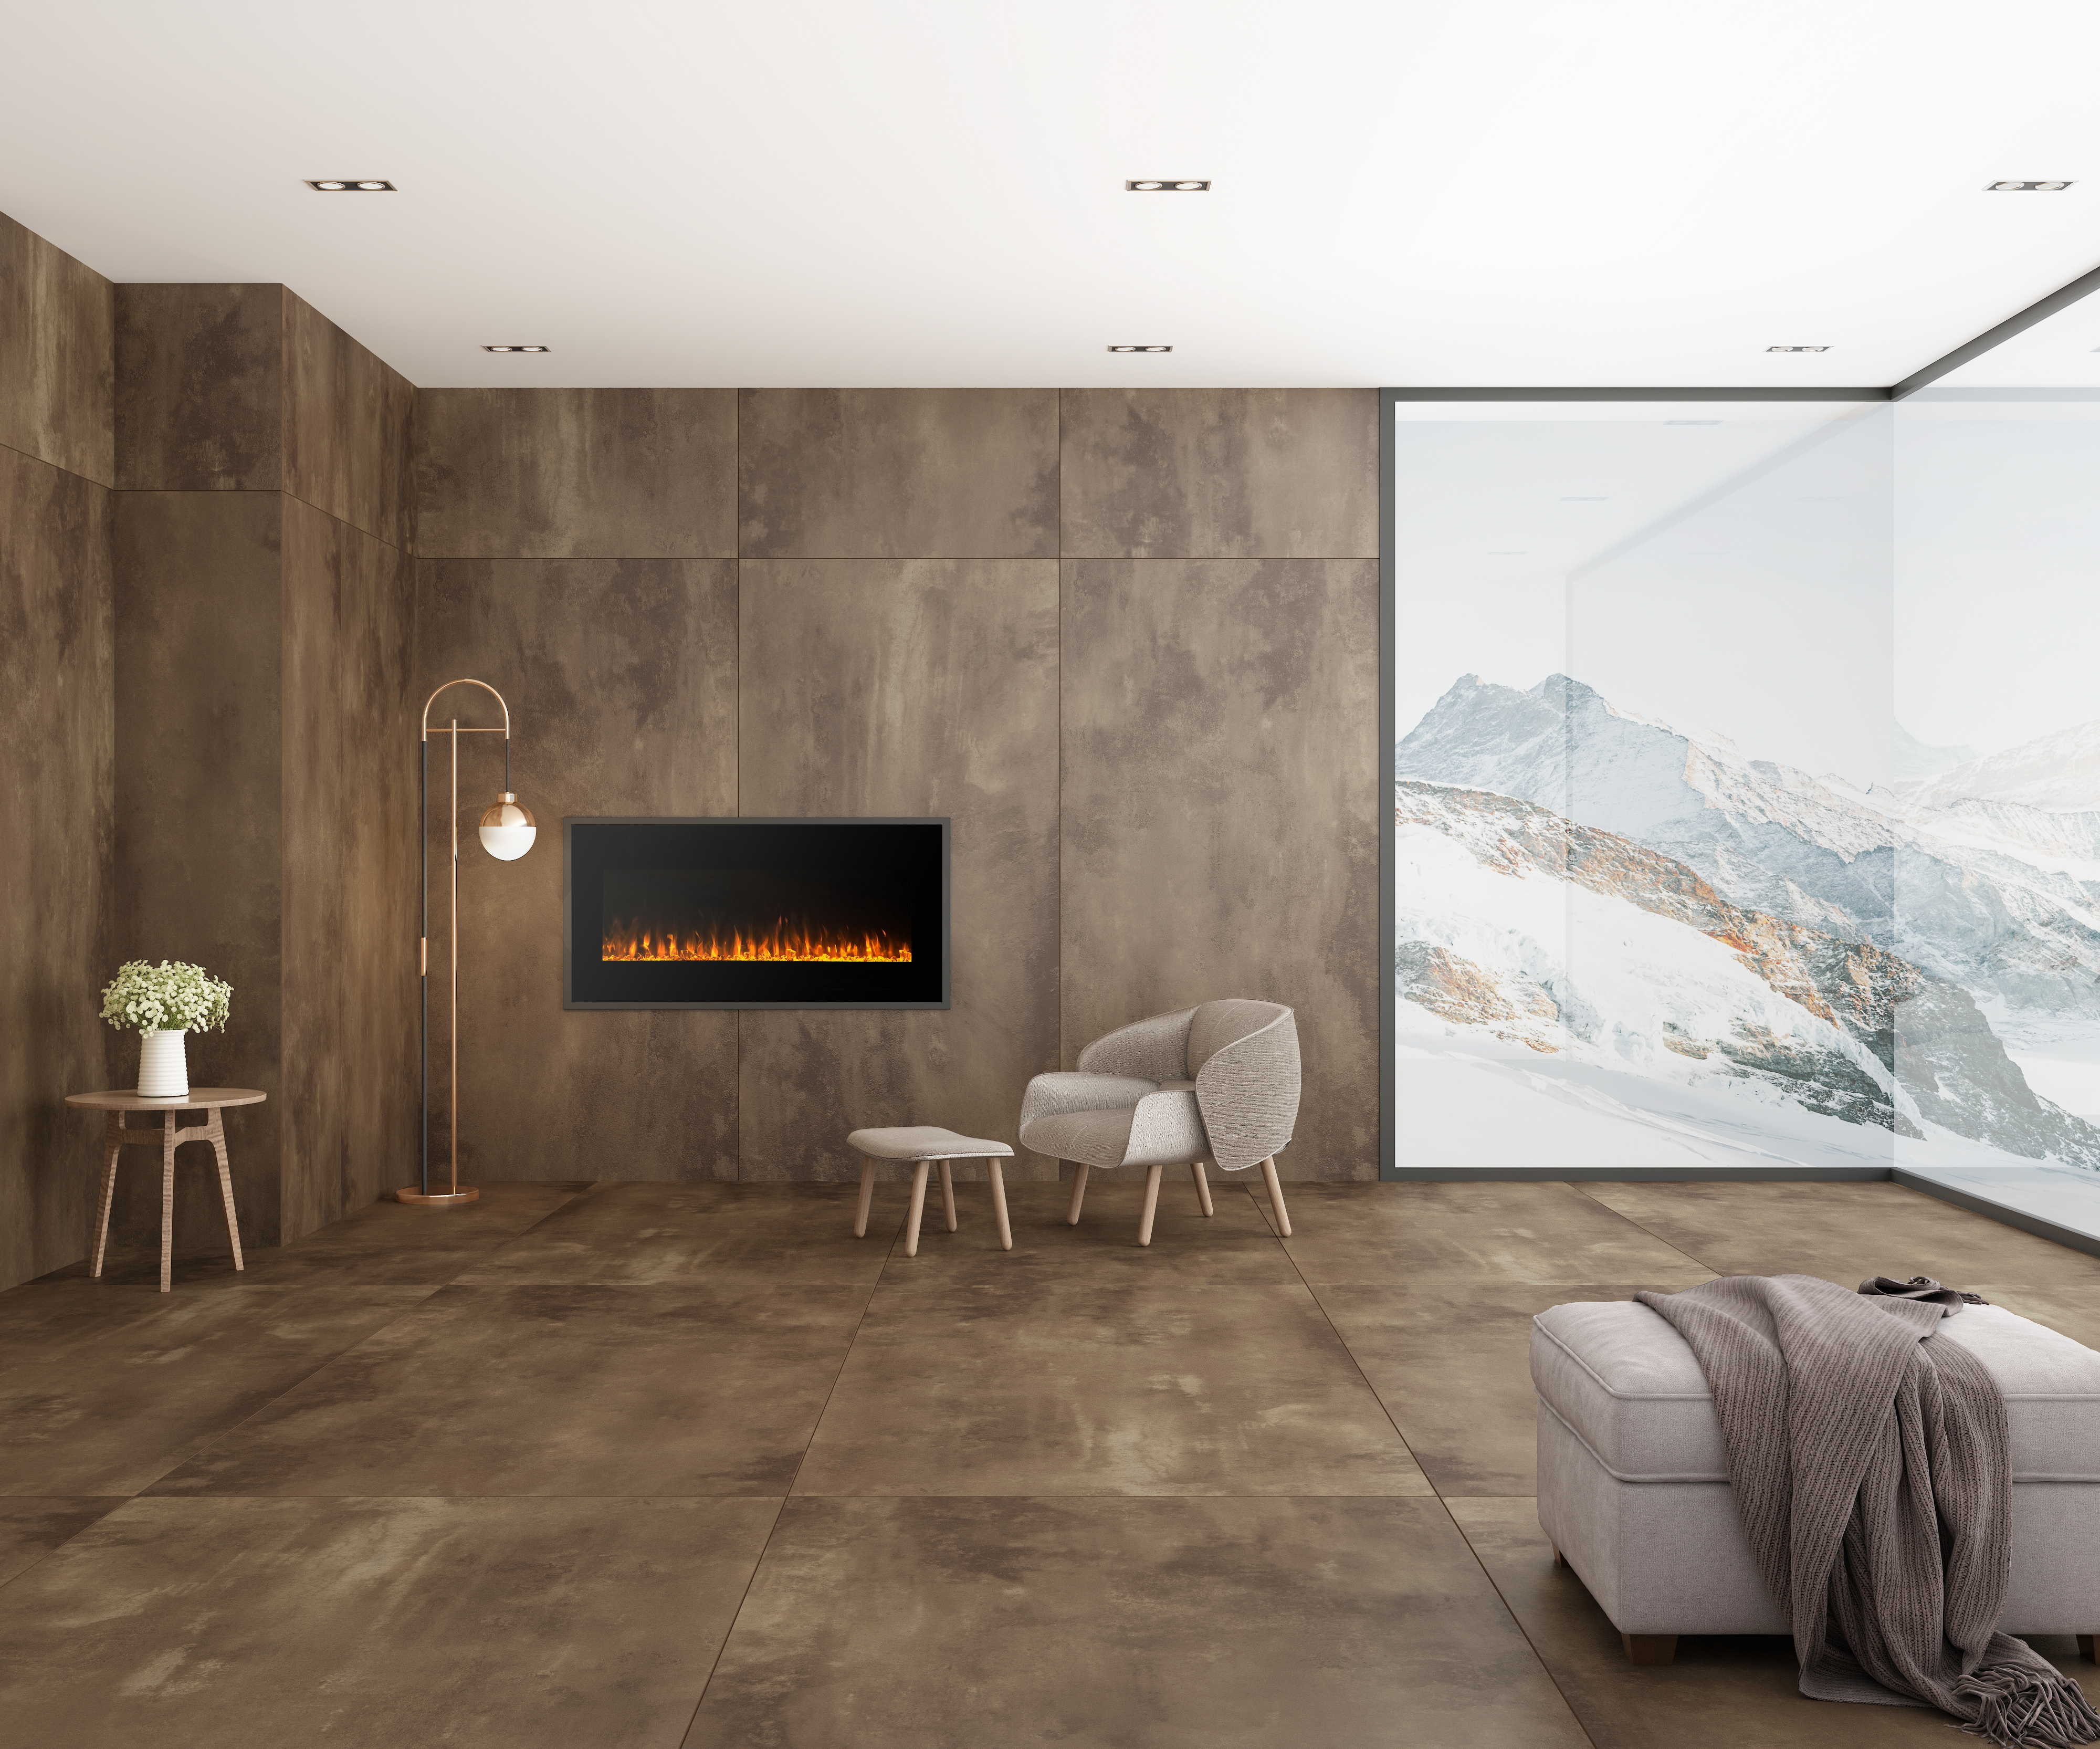 The 5 Best Tips For Maintaining Porcelain Tiles In Winter: Edition 2022